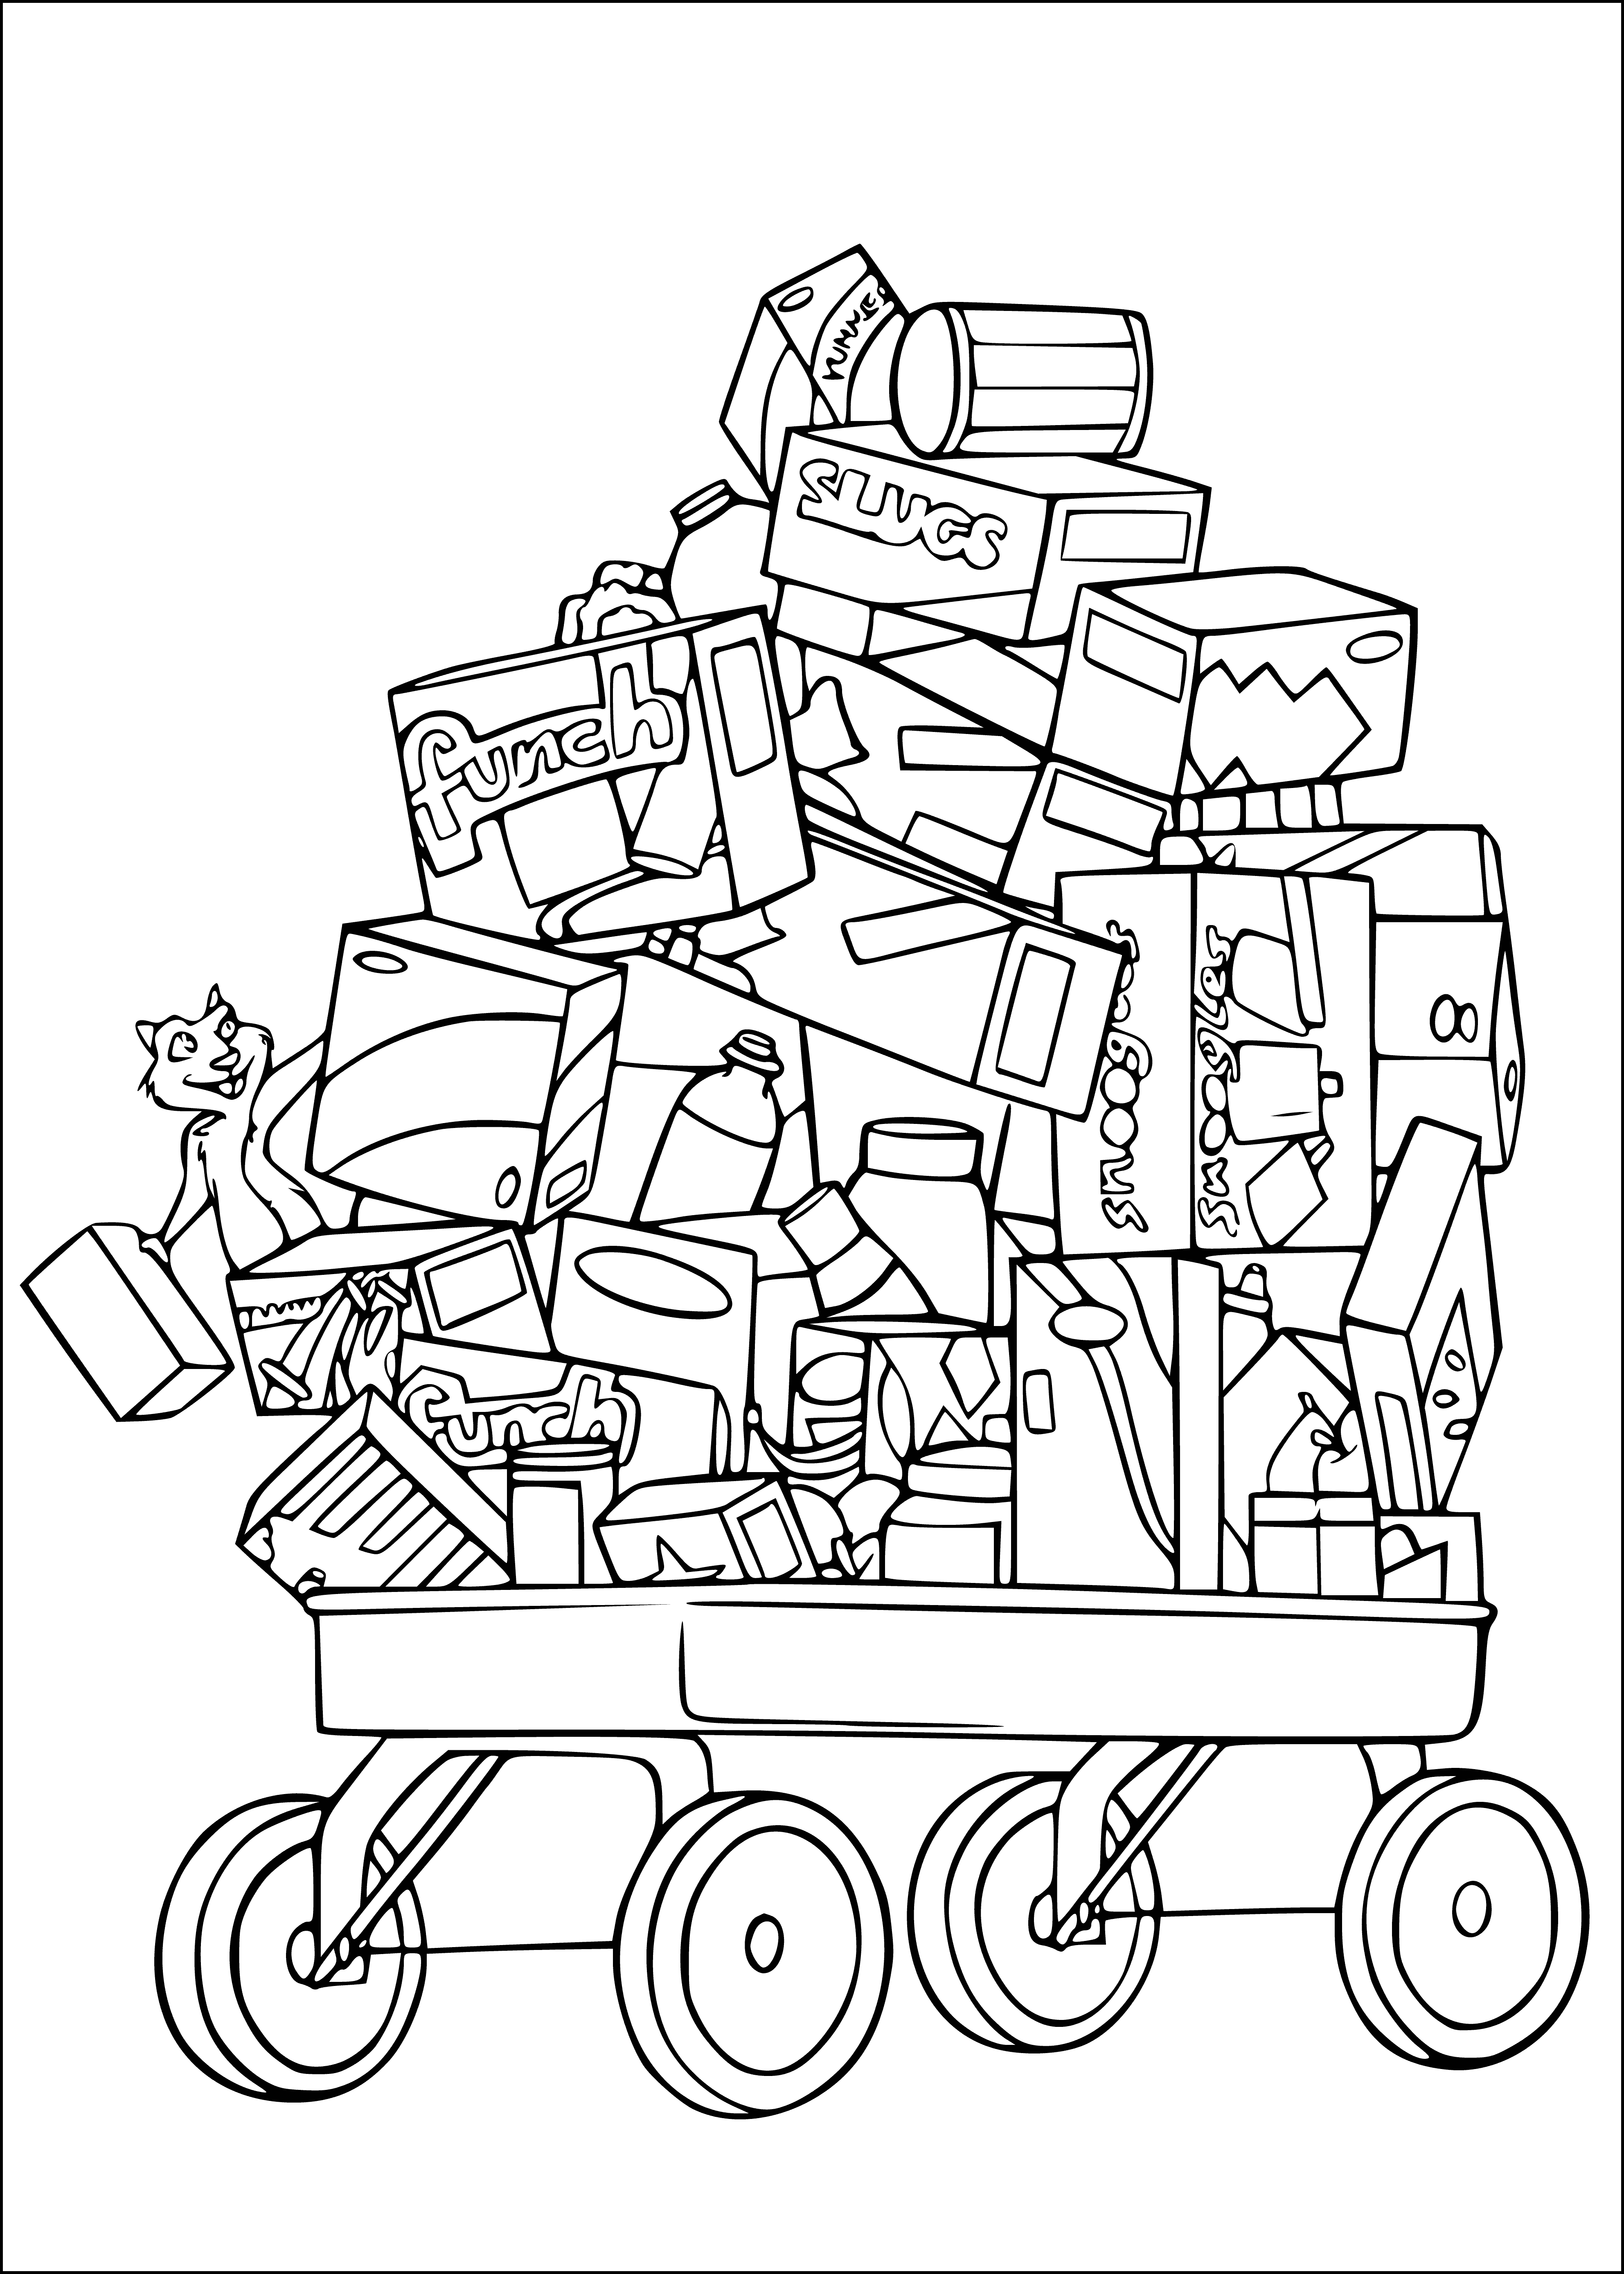 coloring page: A trolley filled with food, including fruit & veg, is featured in a coloring page titled "Over the Hedge - Food Trolley".